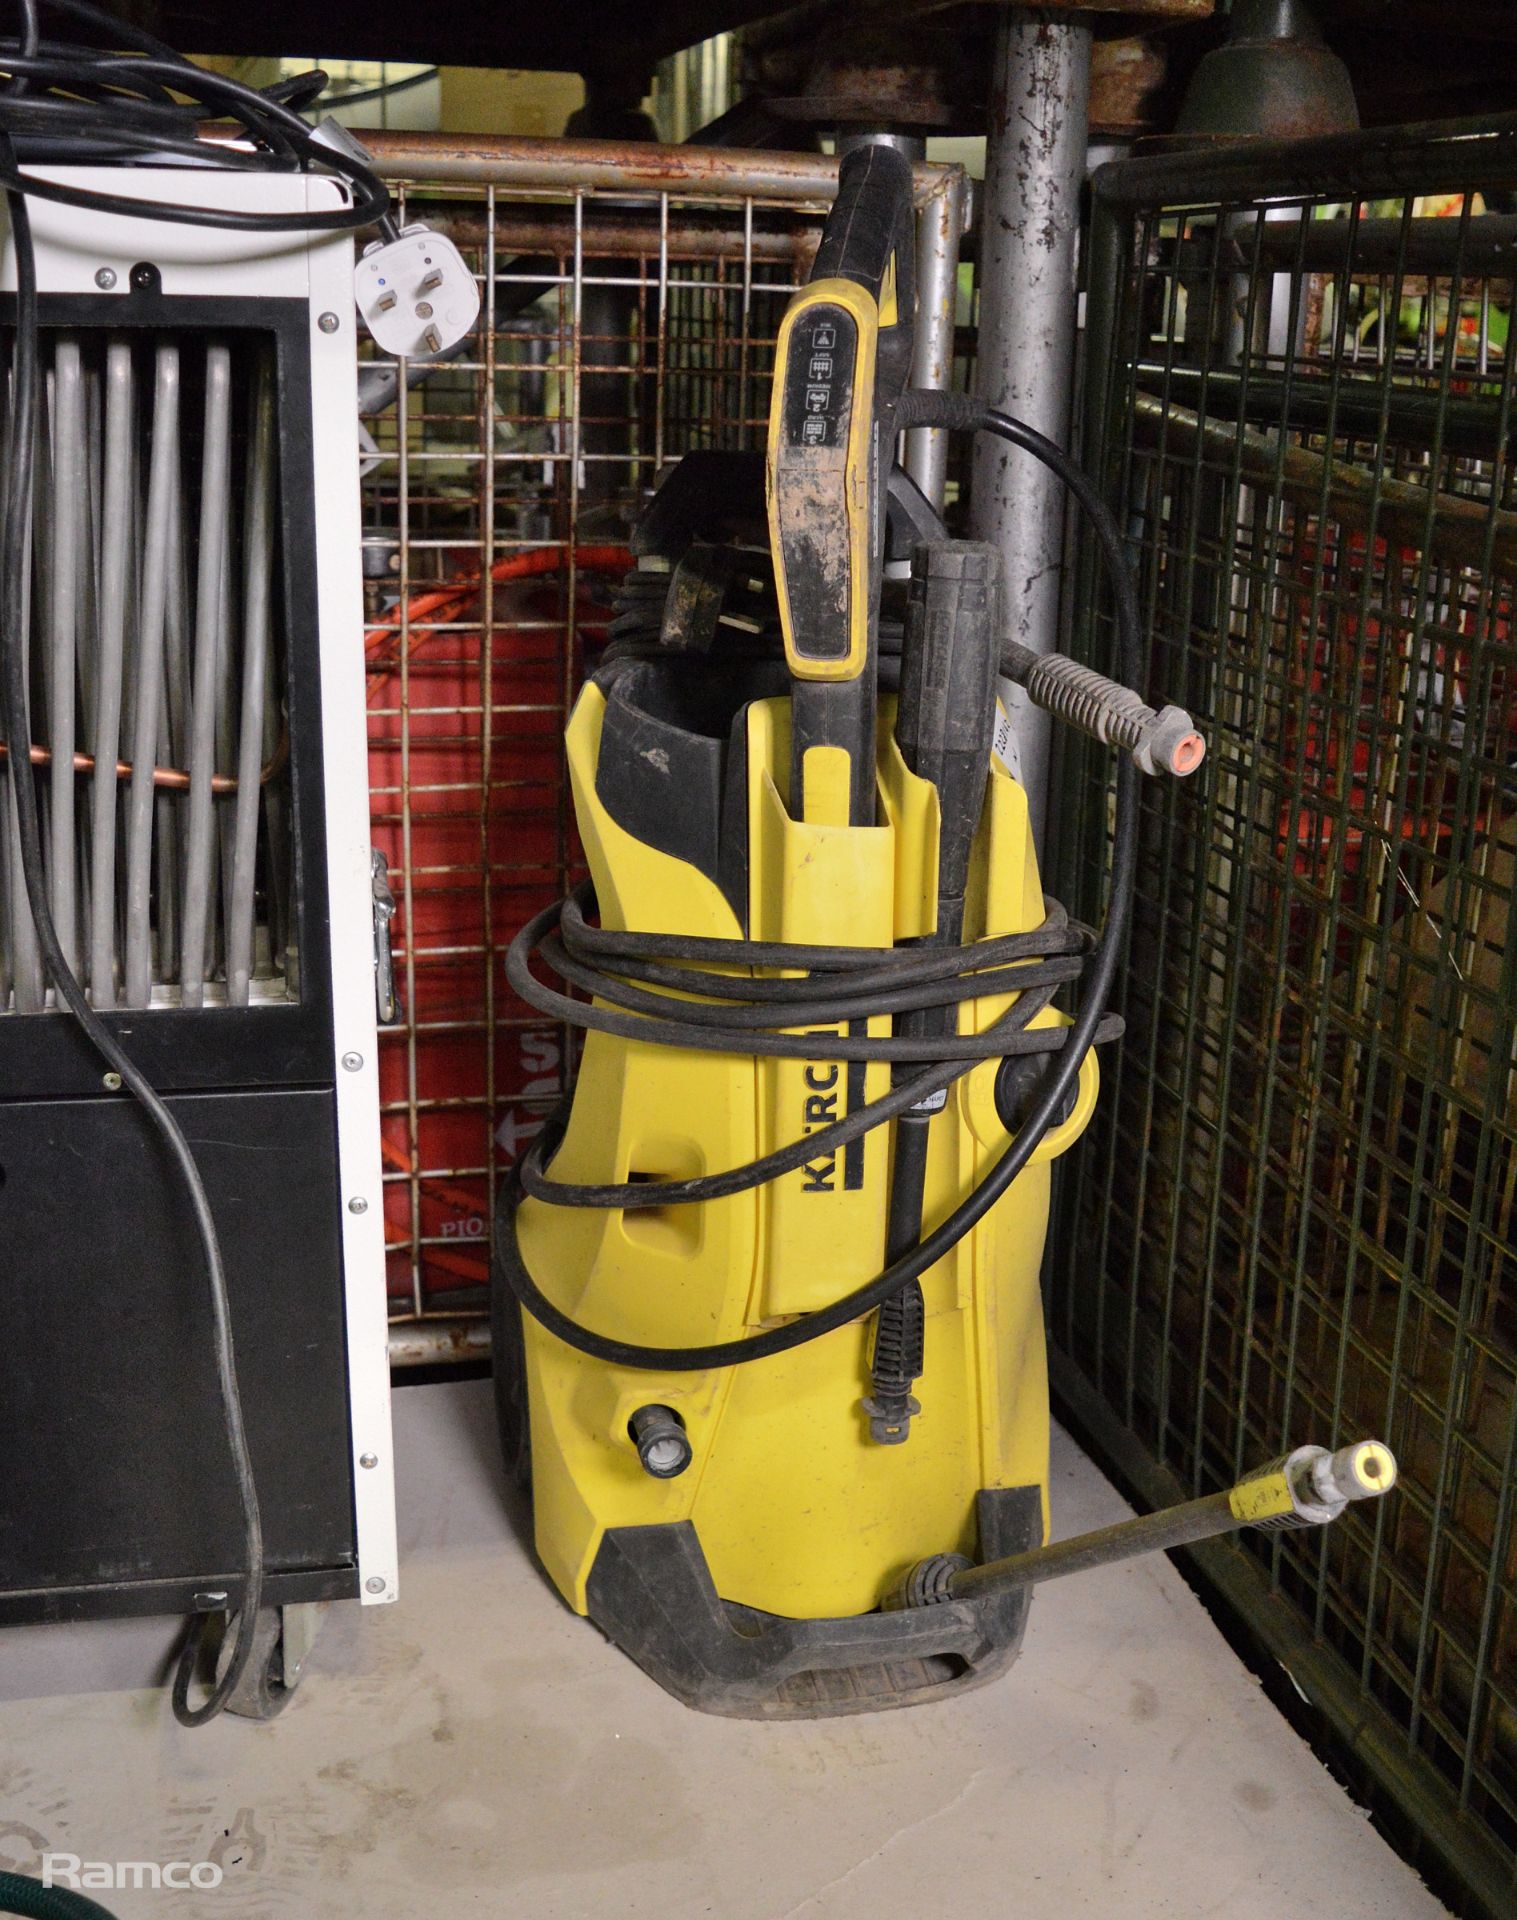 Karcher Patio Cleaning Head Attachment, 2x Karcher K4 Full Control Pressure Washers - Image 10 of 12